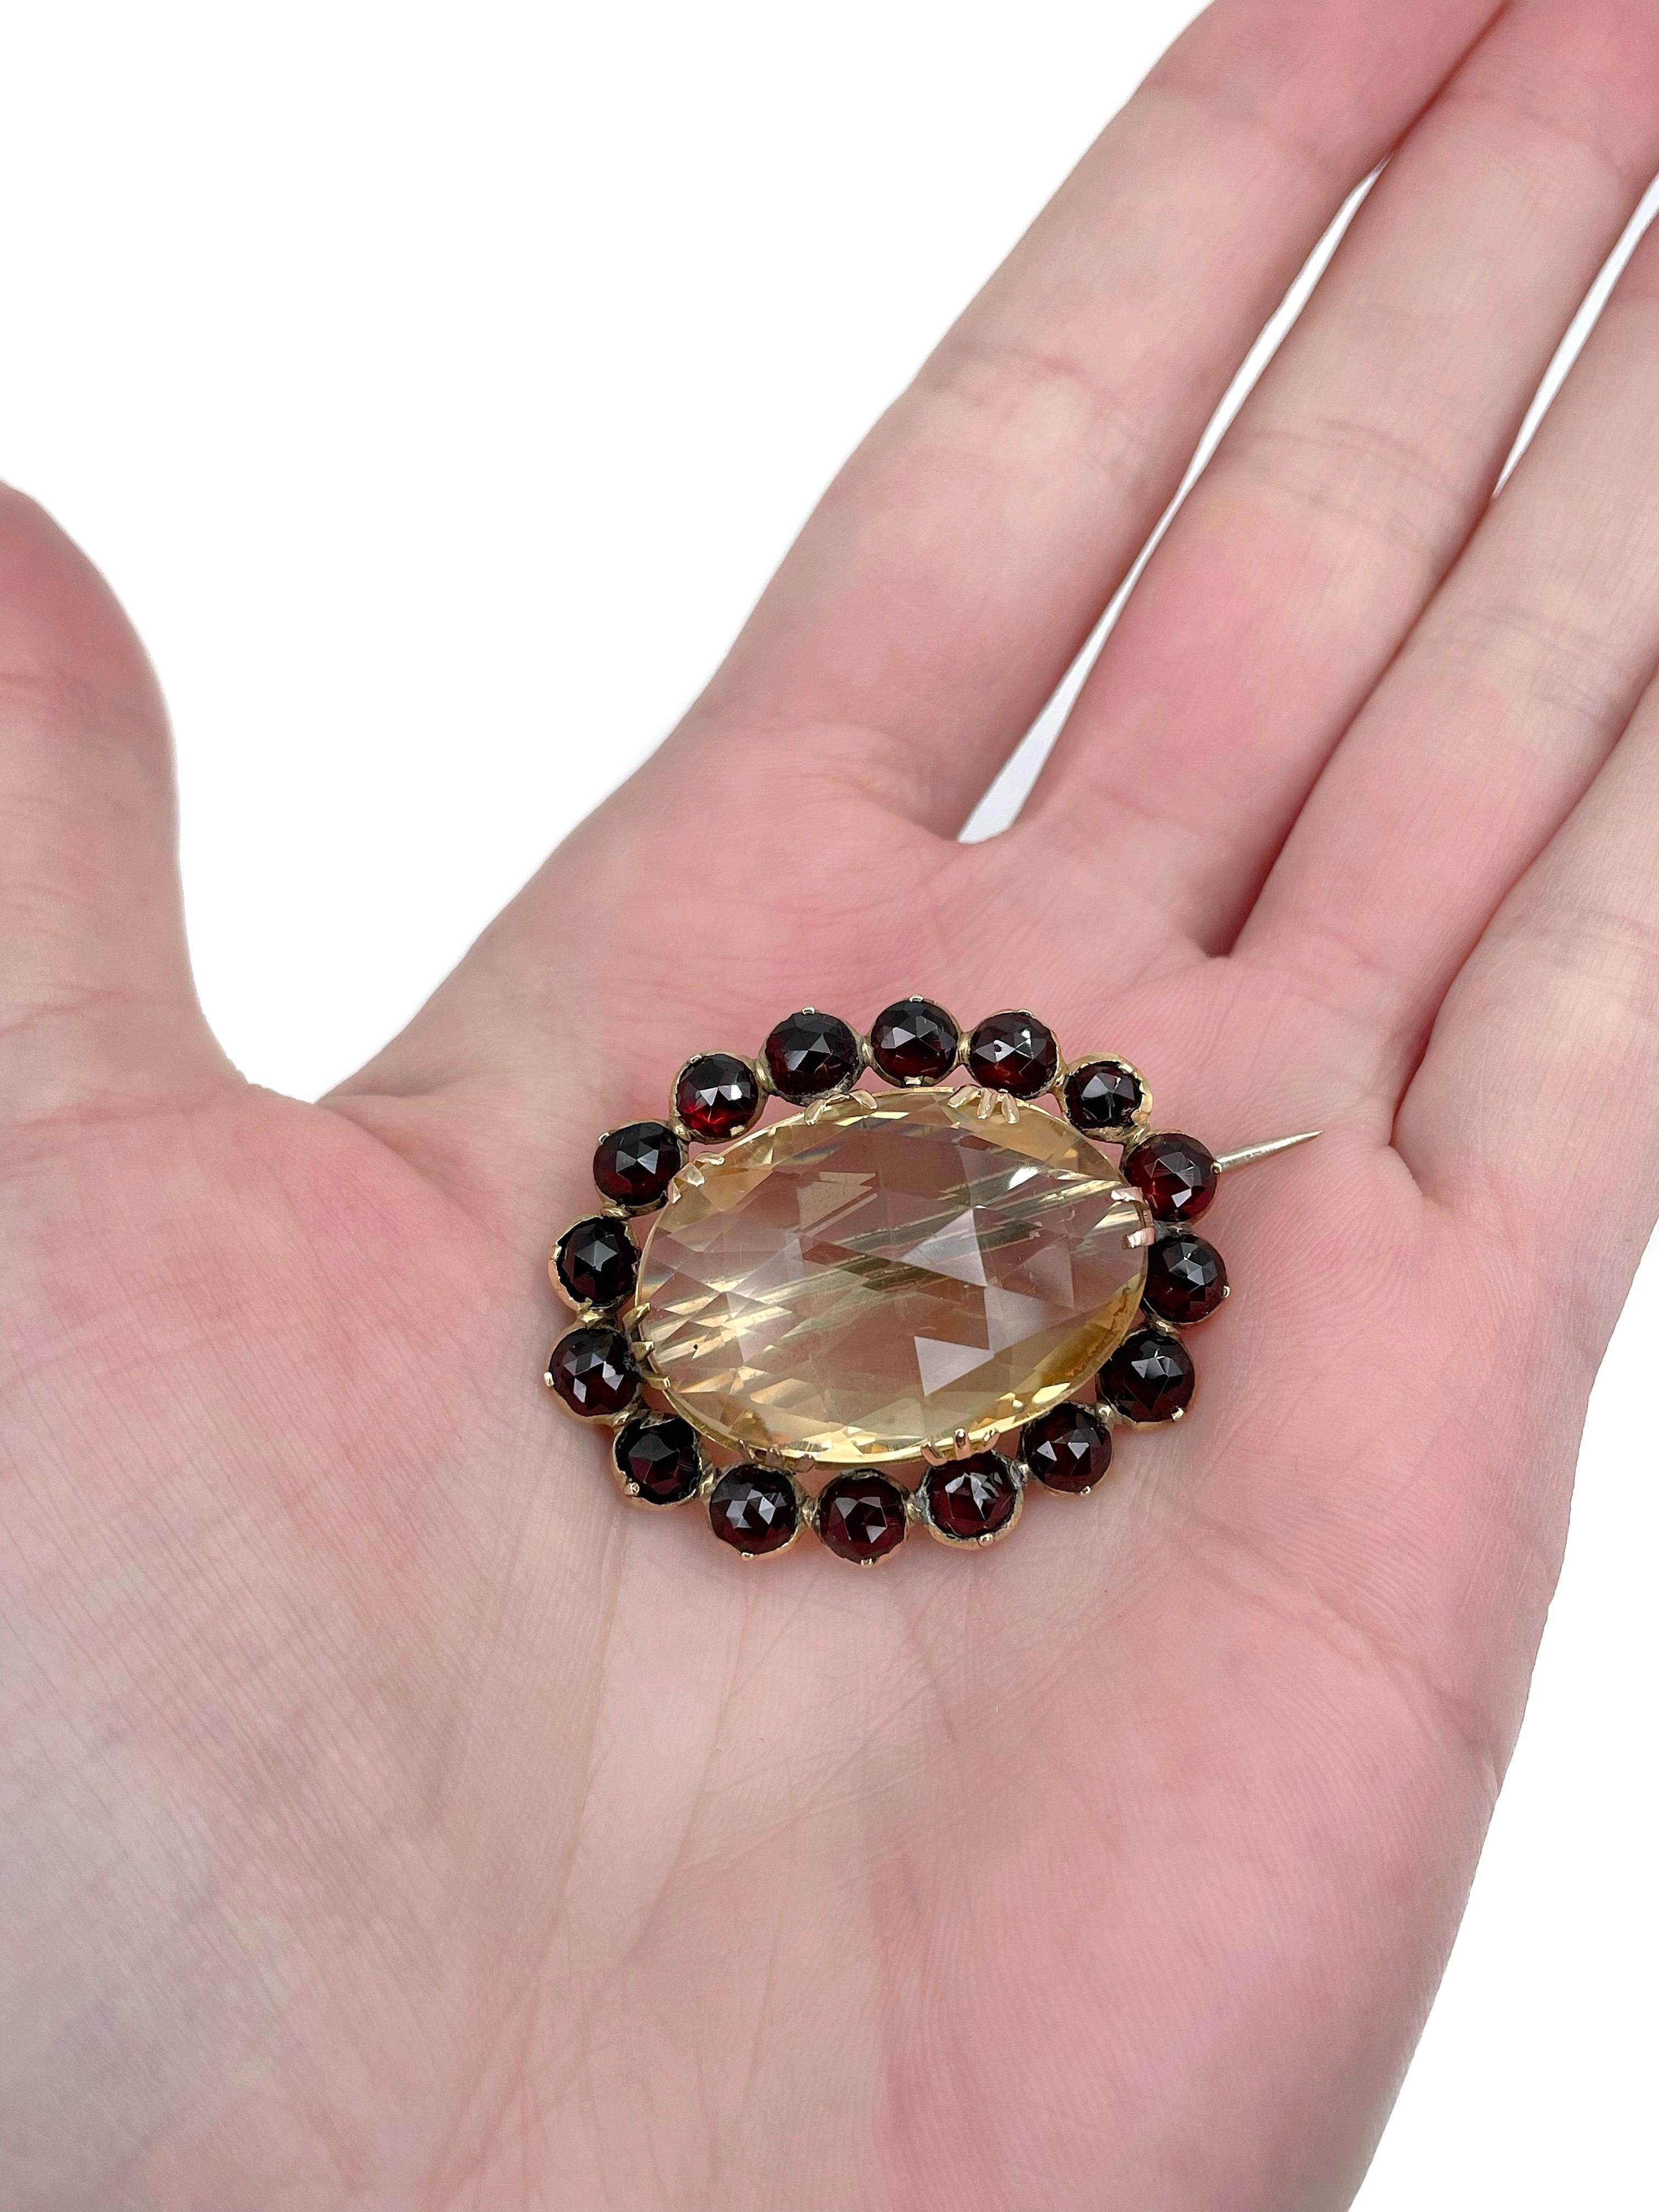 This is a Victorian oval pin brooch crafted in 9K yellow gold (needle - MET). Circa 1870.

It features faceted citrine. The gem is surrounded with rose cut garnets. 

Has a C clasp. 

Weight: 11.28g
Length (with a needle): 4.5cm
Width: 3cm

———

If